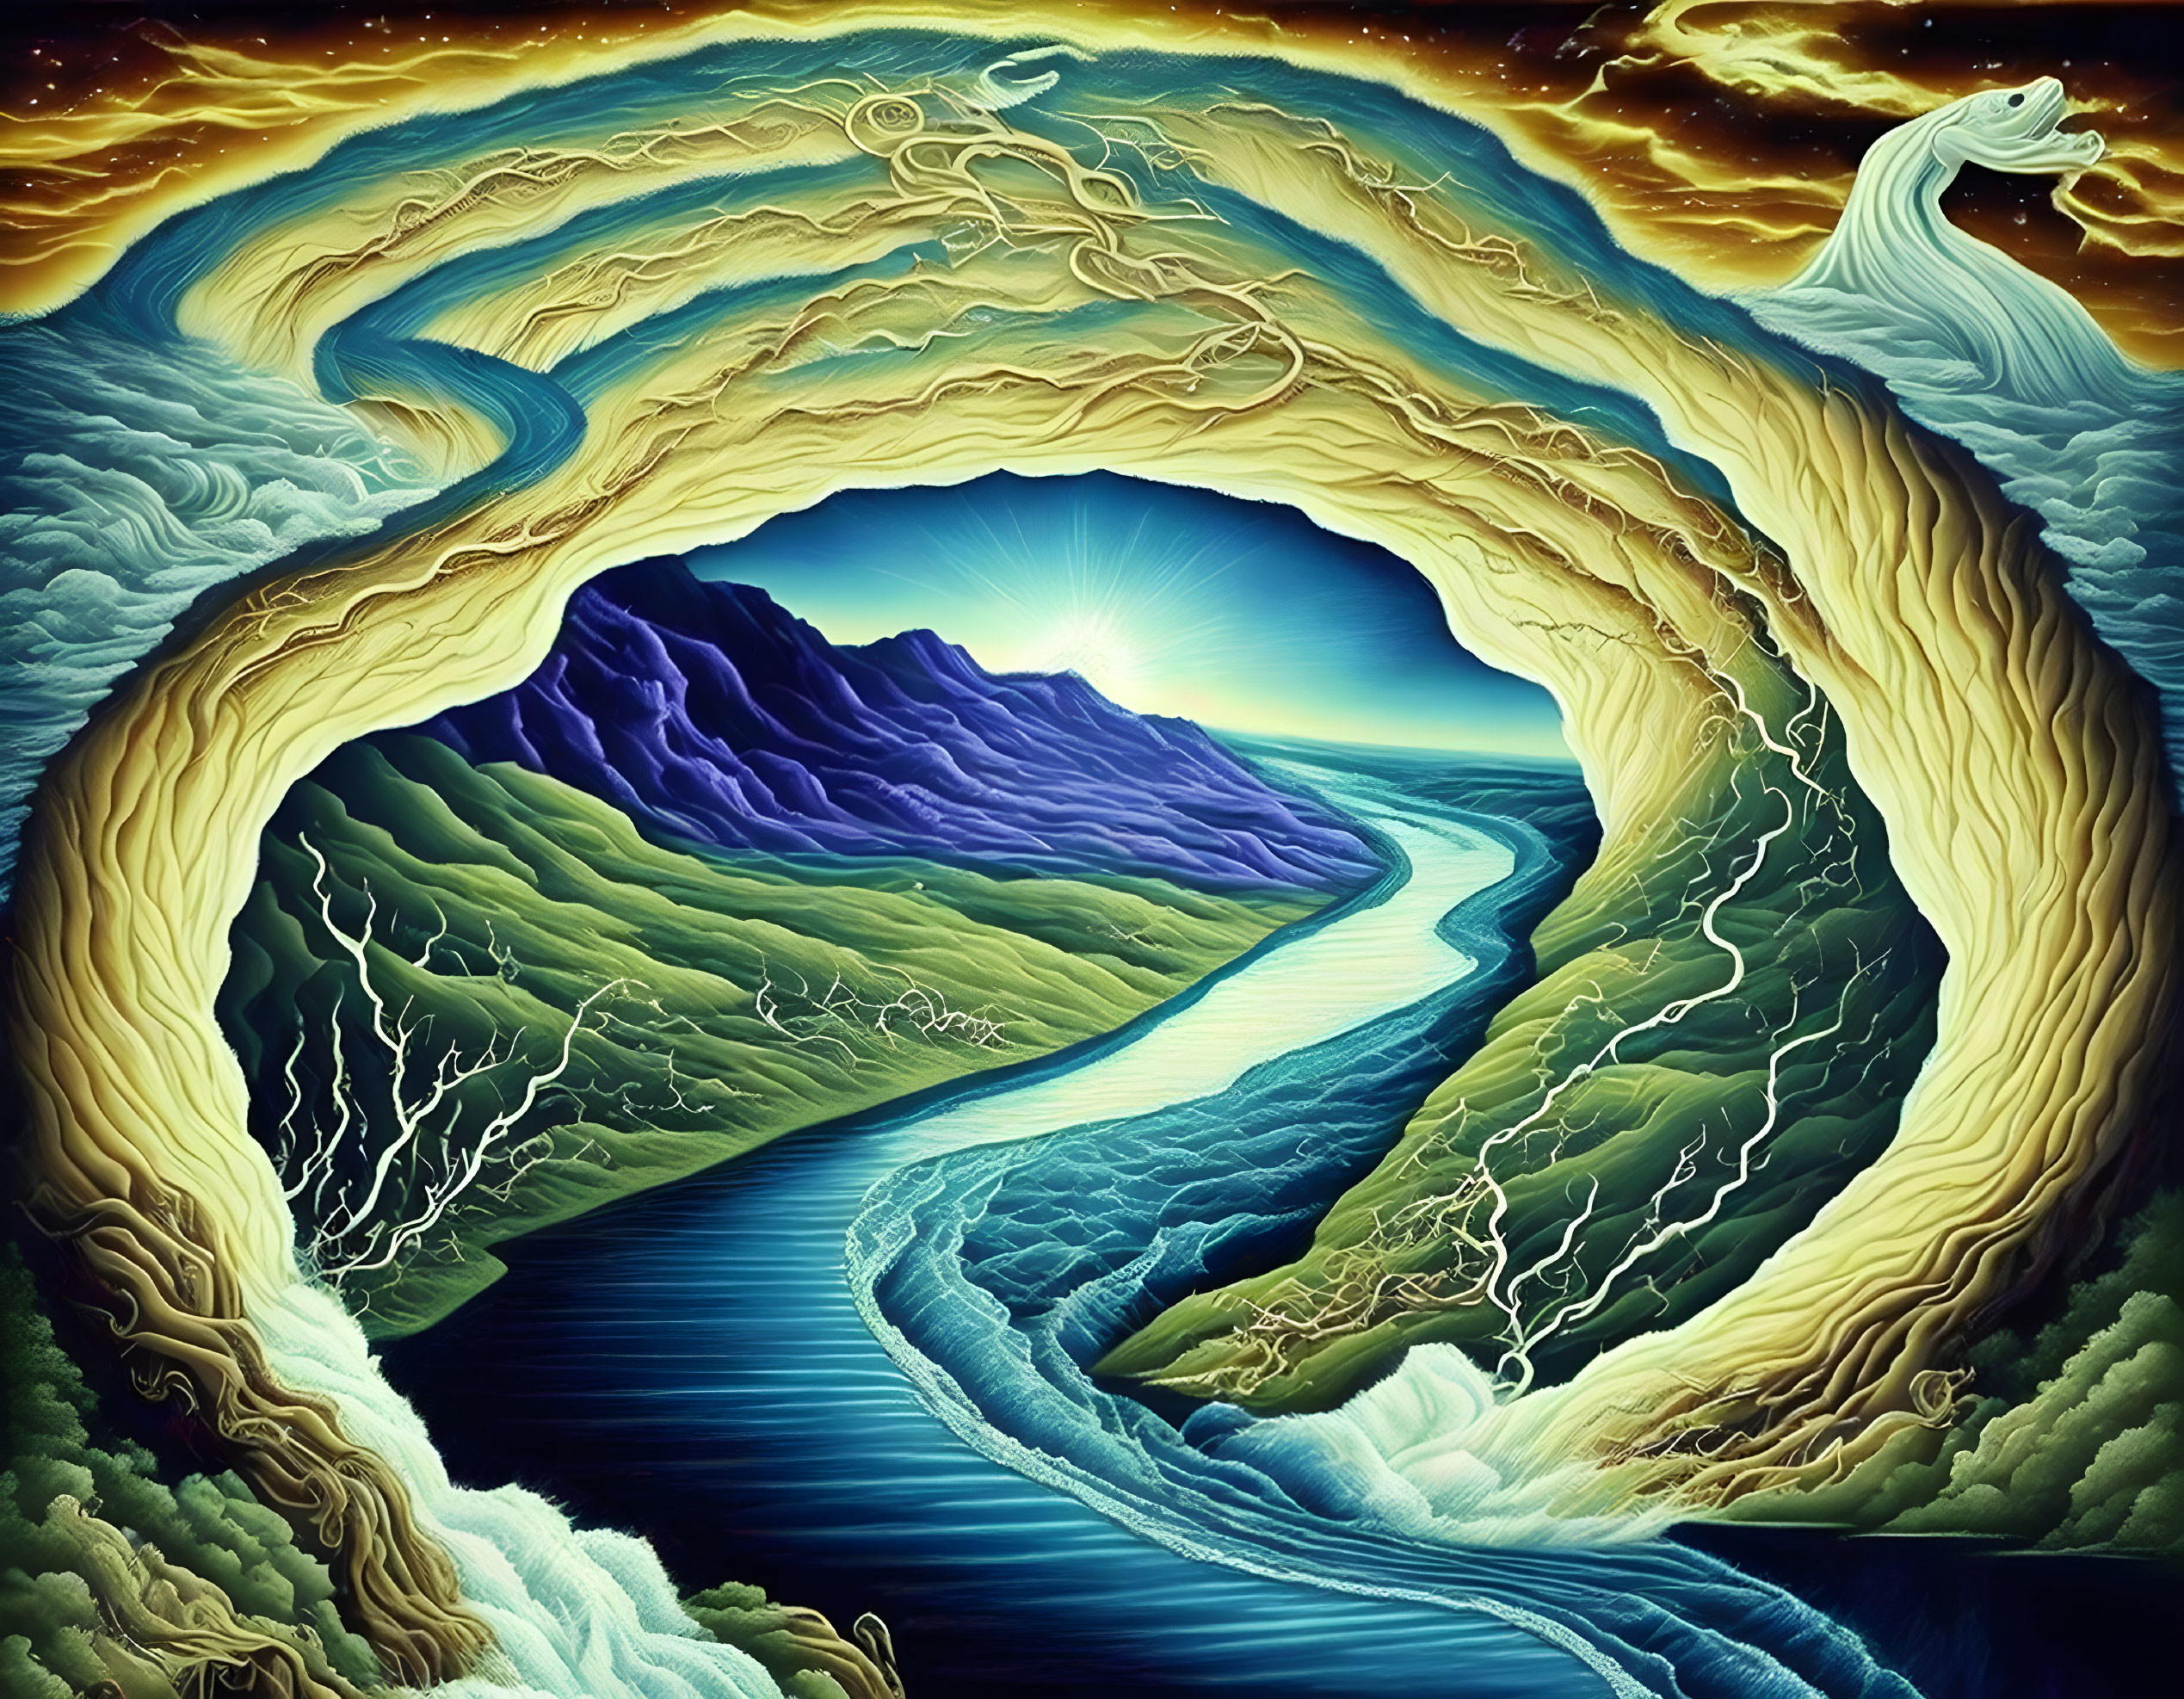 Surreal landscape with river, mountains, wave, lightning, and clouds